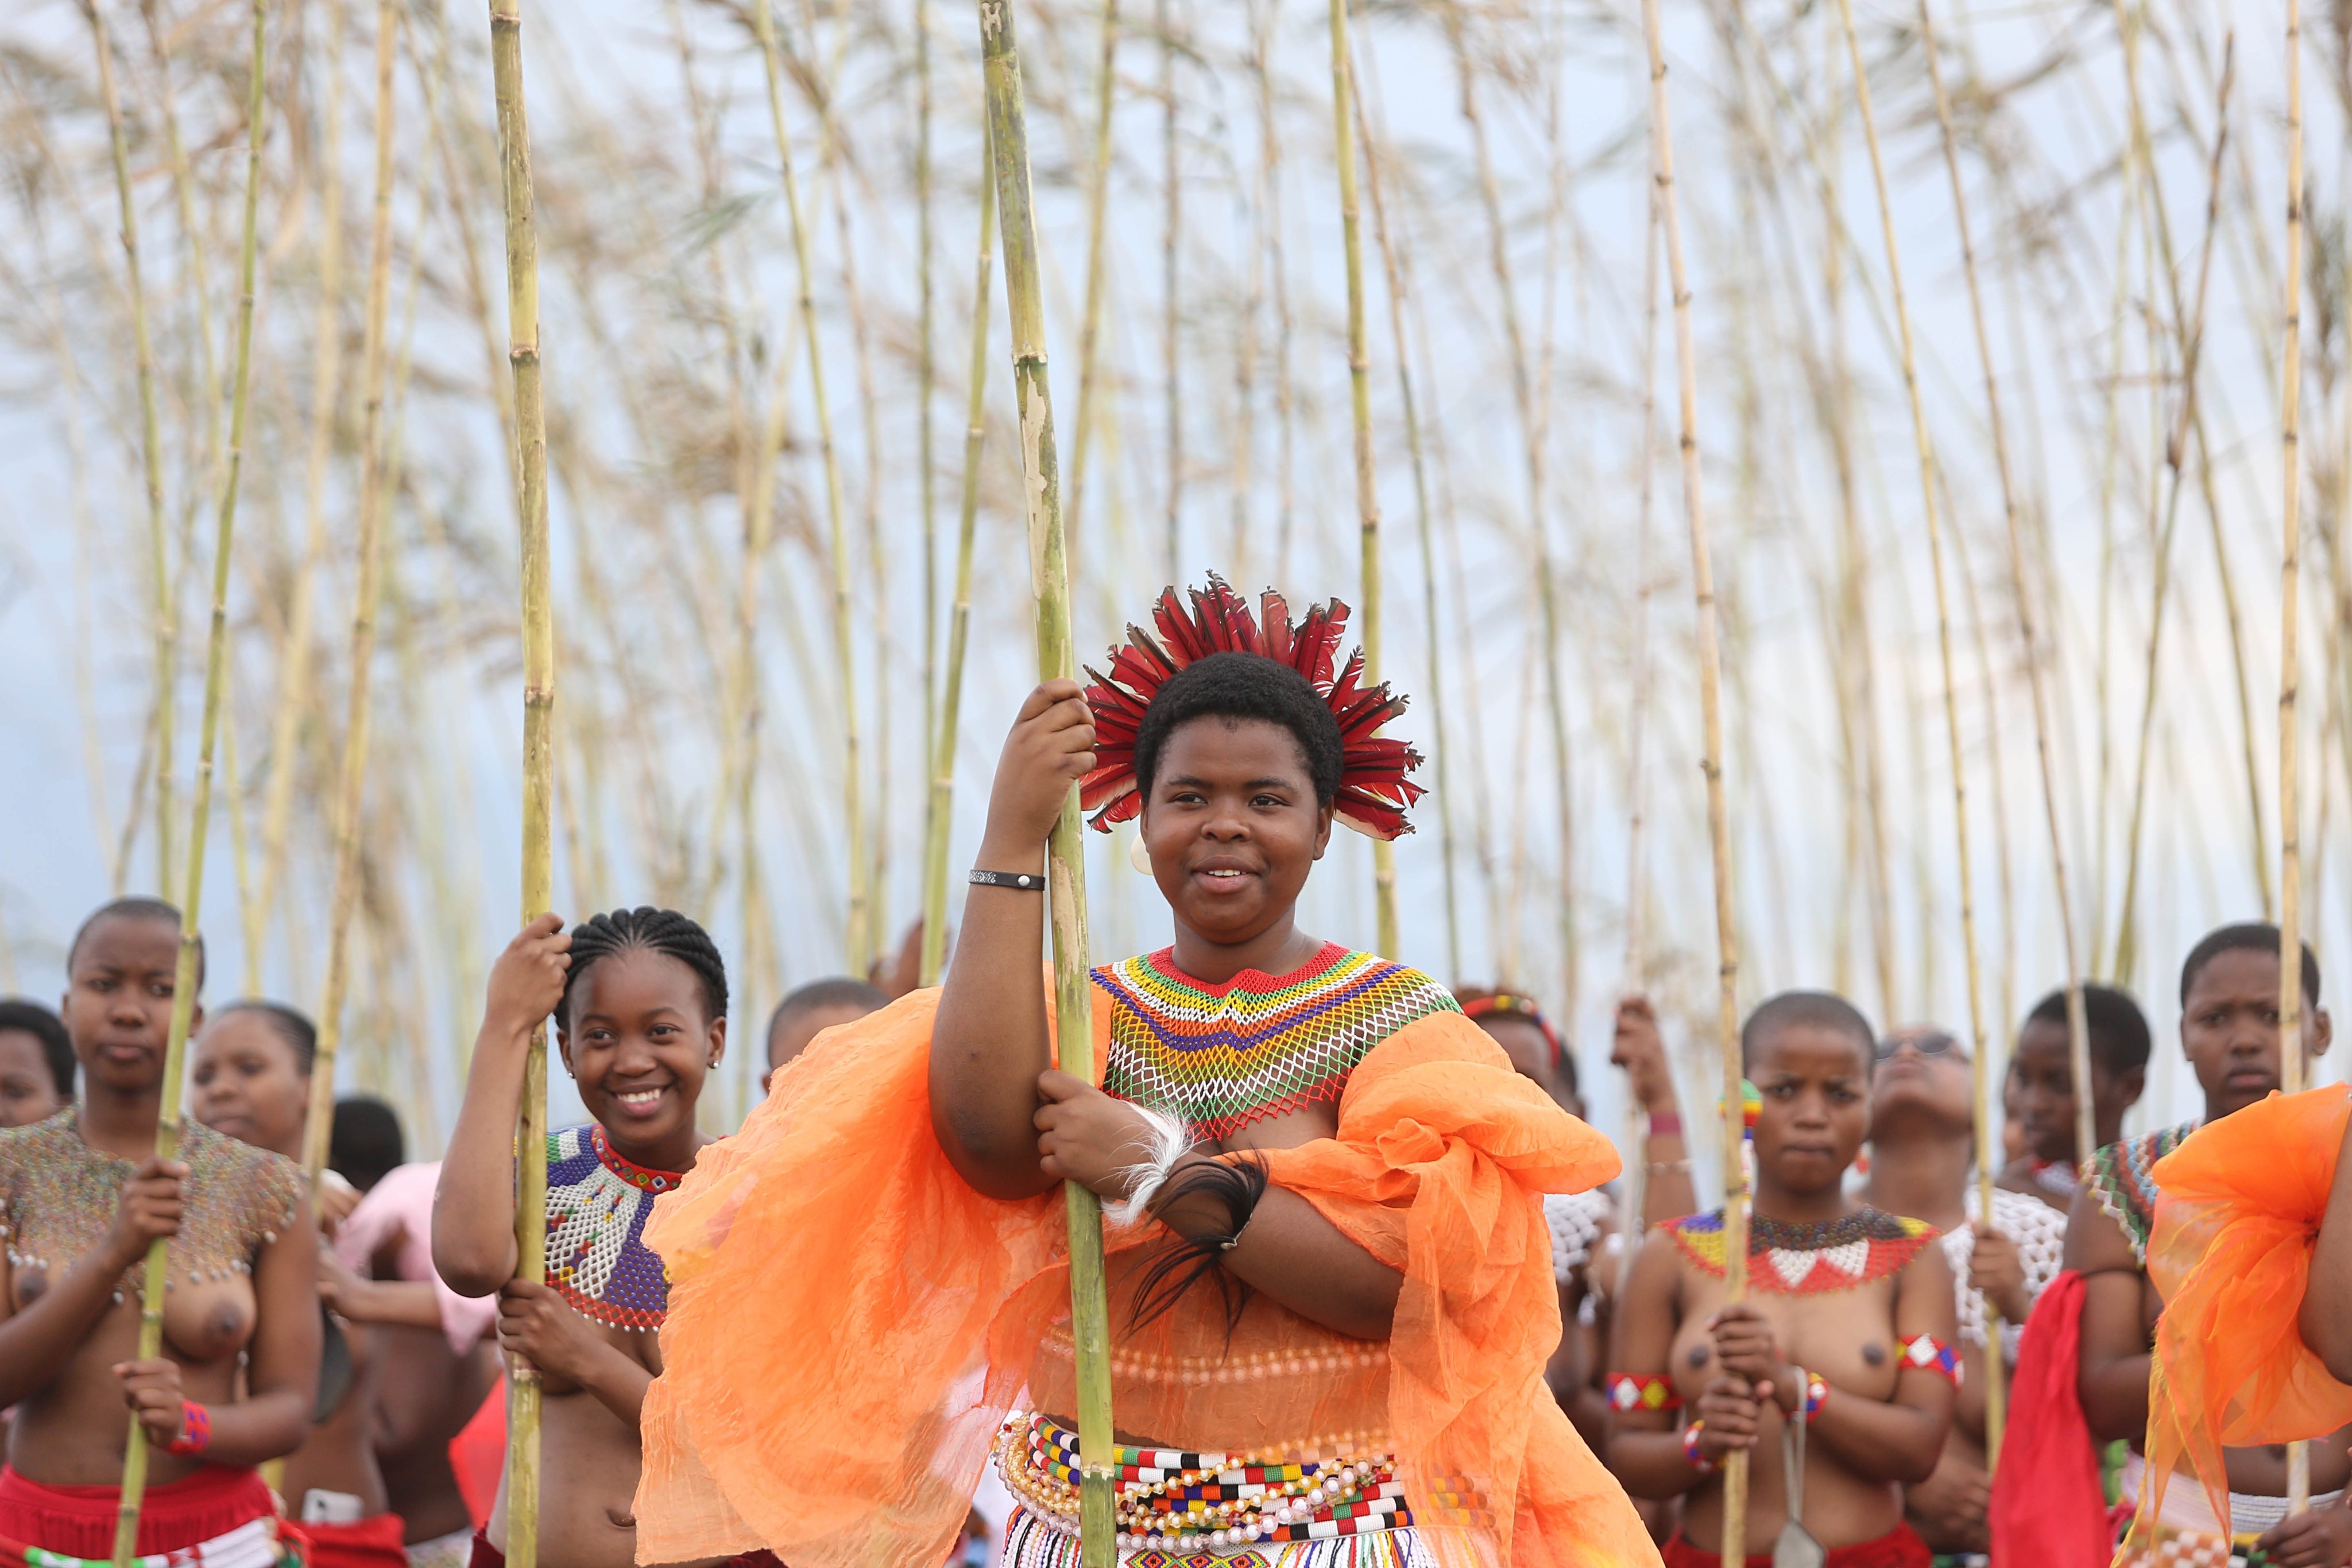 Zulu maidens gather for the annual reed dance in South Africa